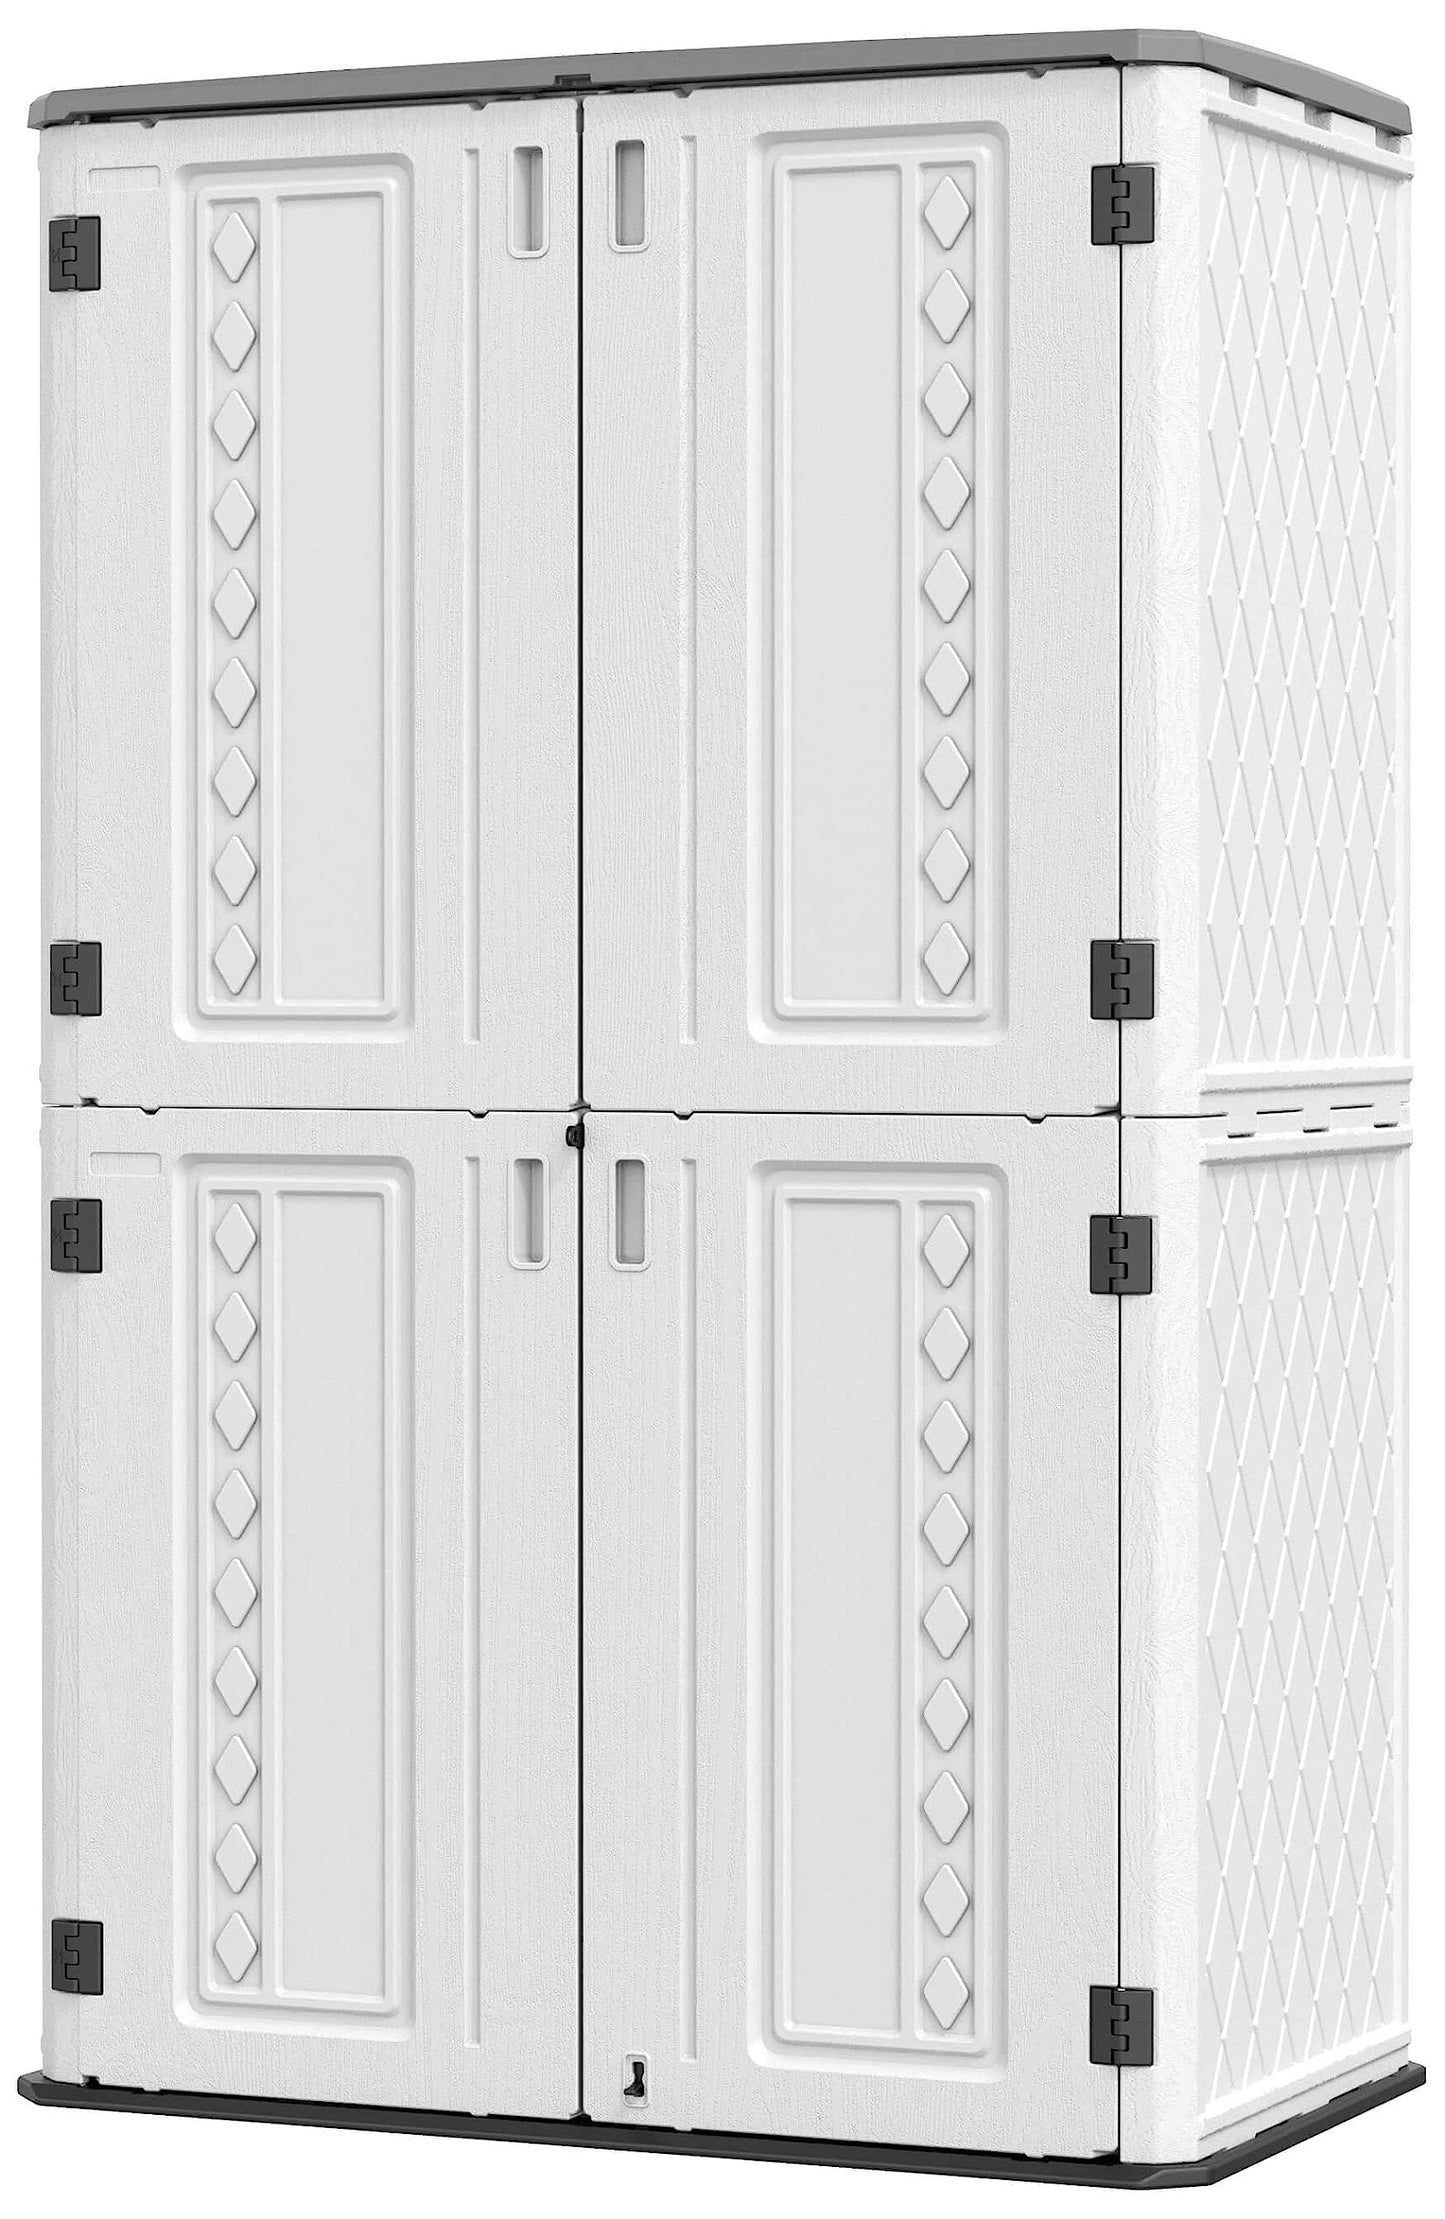 HOMSPARK Outdoor Storage Shed, 53 Cu.ft Outdoor Storage Cabinet with Lockable Doors, Double Layer Resin Vertical Storage shed for Garden, Patio, Backyard, 4×2.5×6.6 FT Grey roof,white wall,Black floor